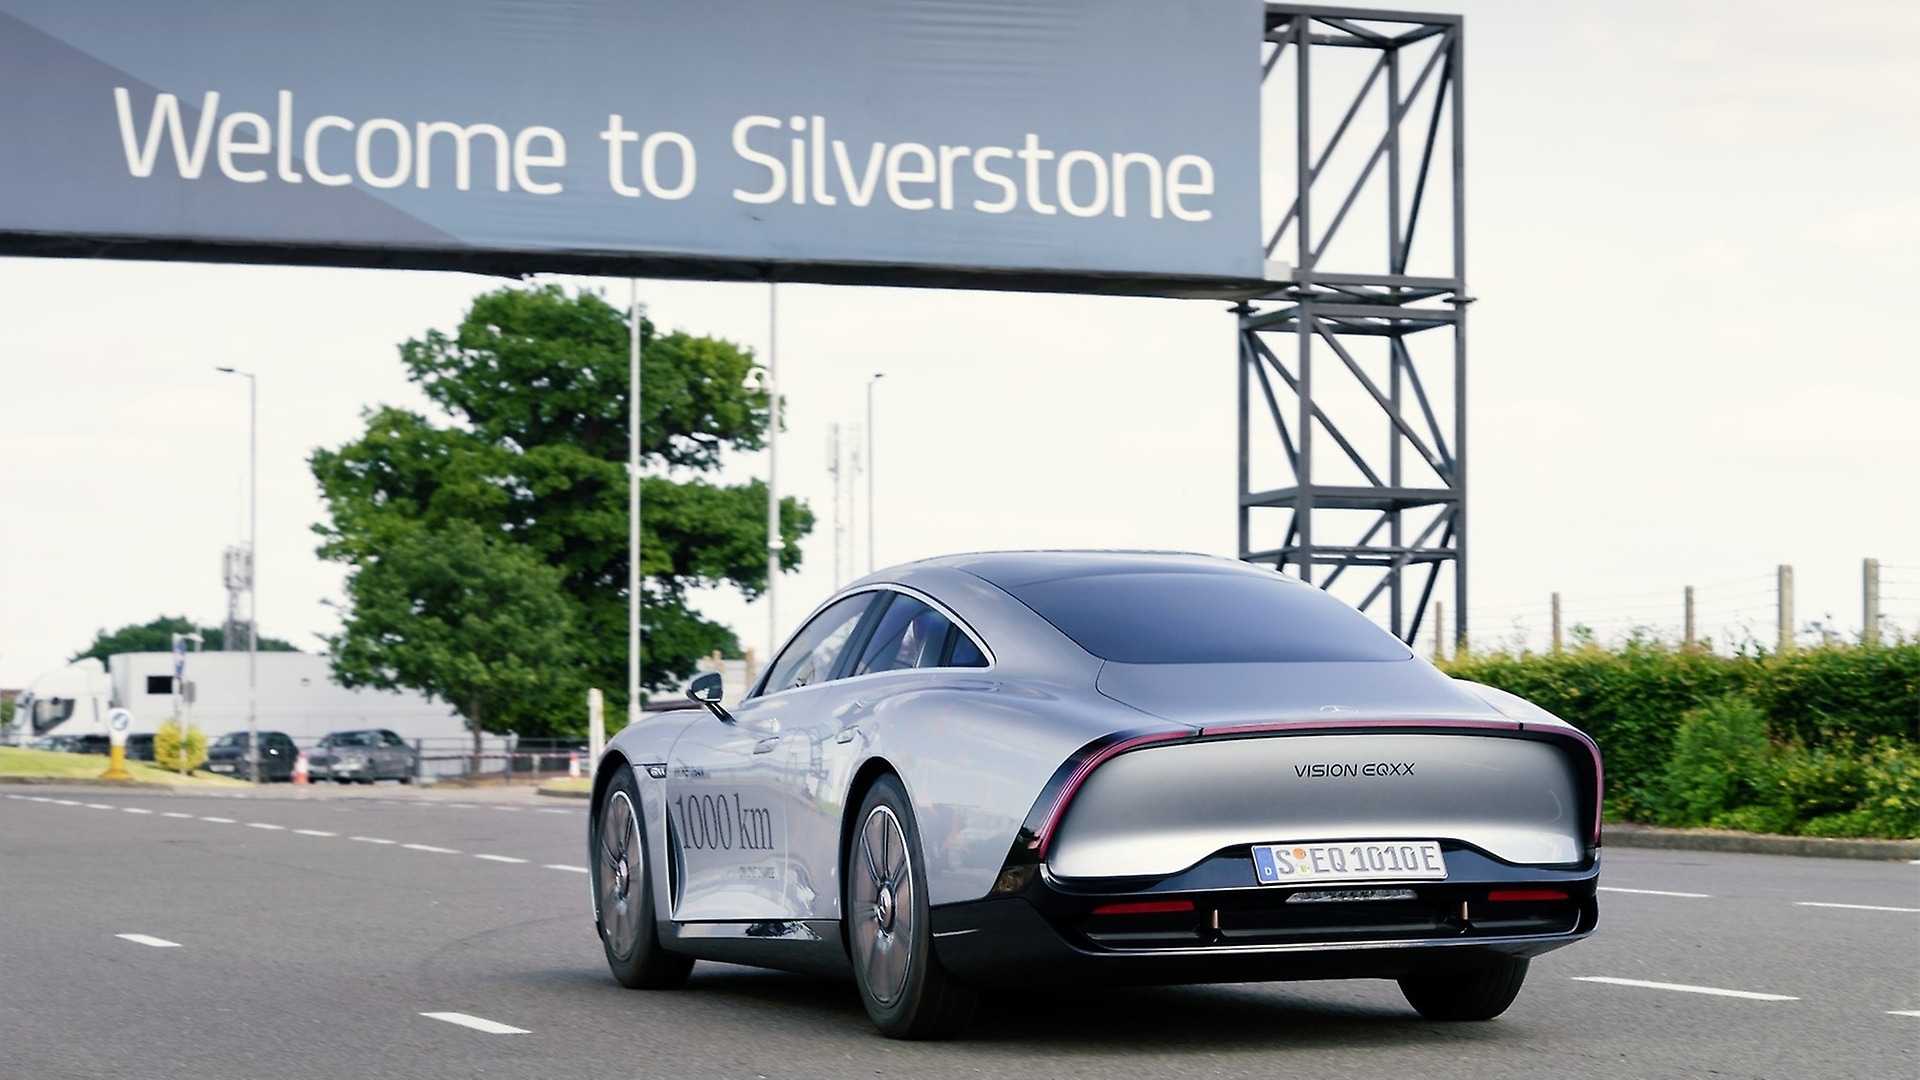 VISION EQXX Ankunft in Silverstone.